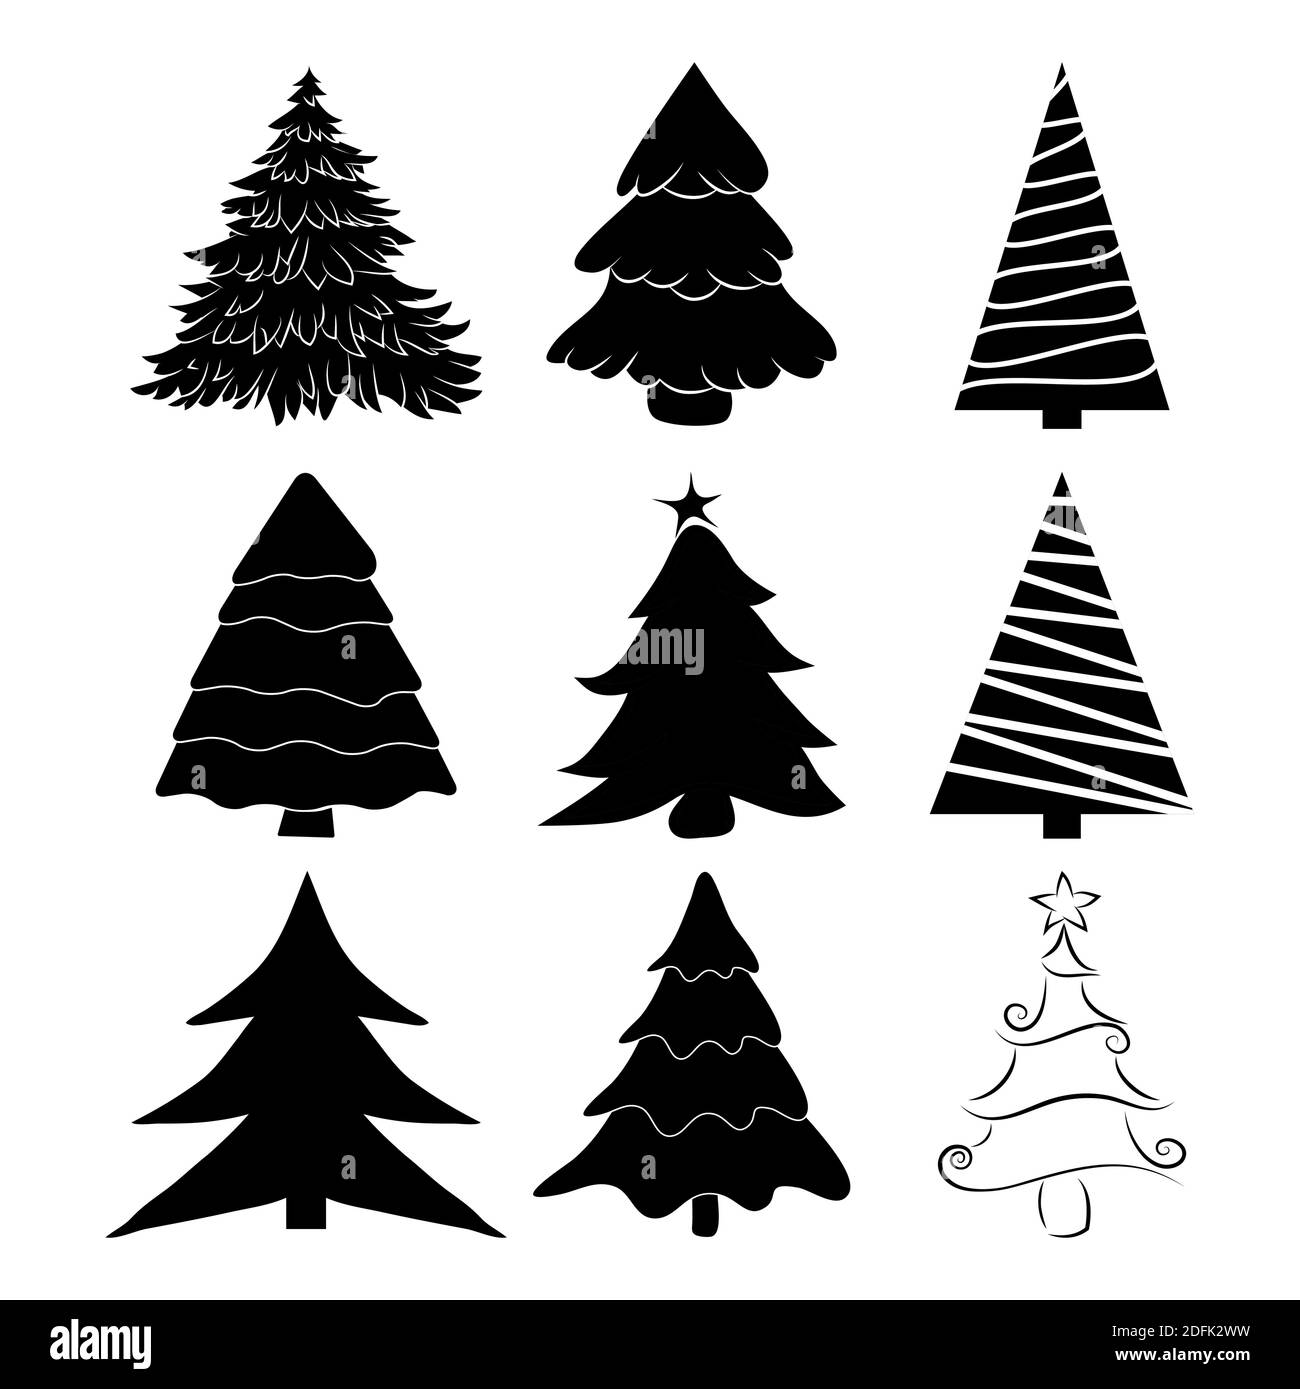 Christmas tree silhouettes set. Black pines icon for xmas card or invitation. Symbol of december. Collection of pine shapes design. Fir tree illustrat Stock Vector